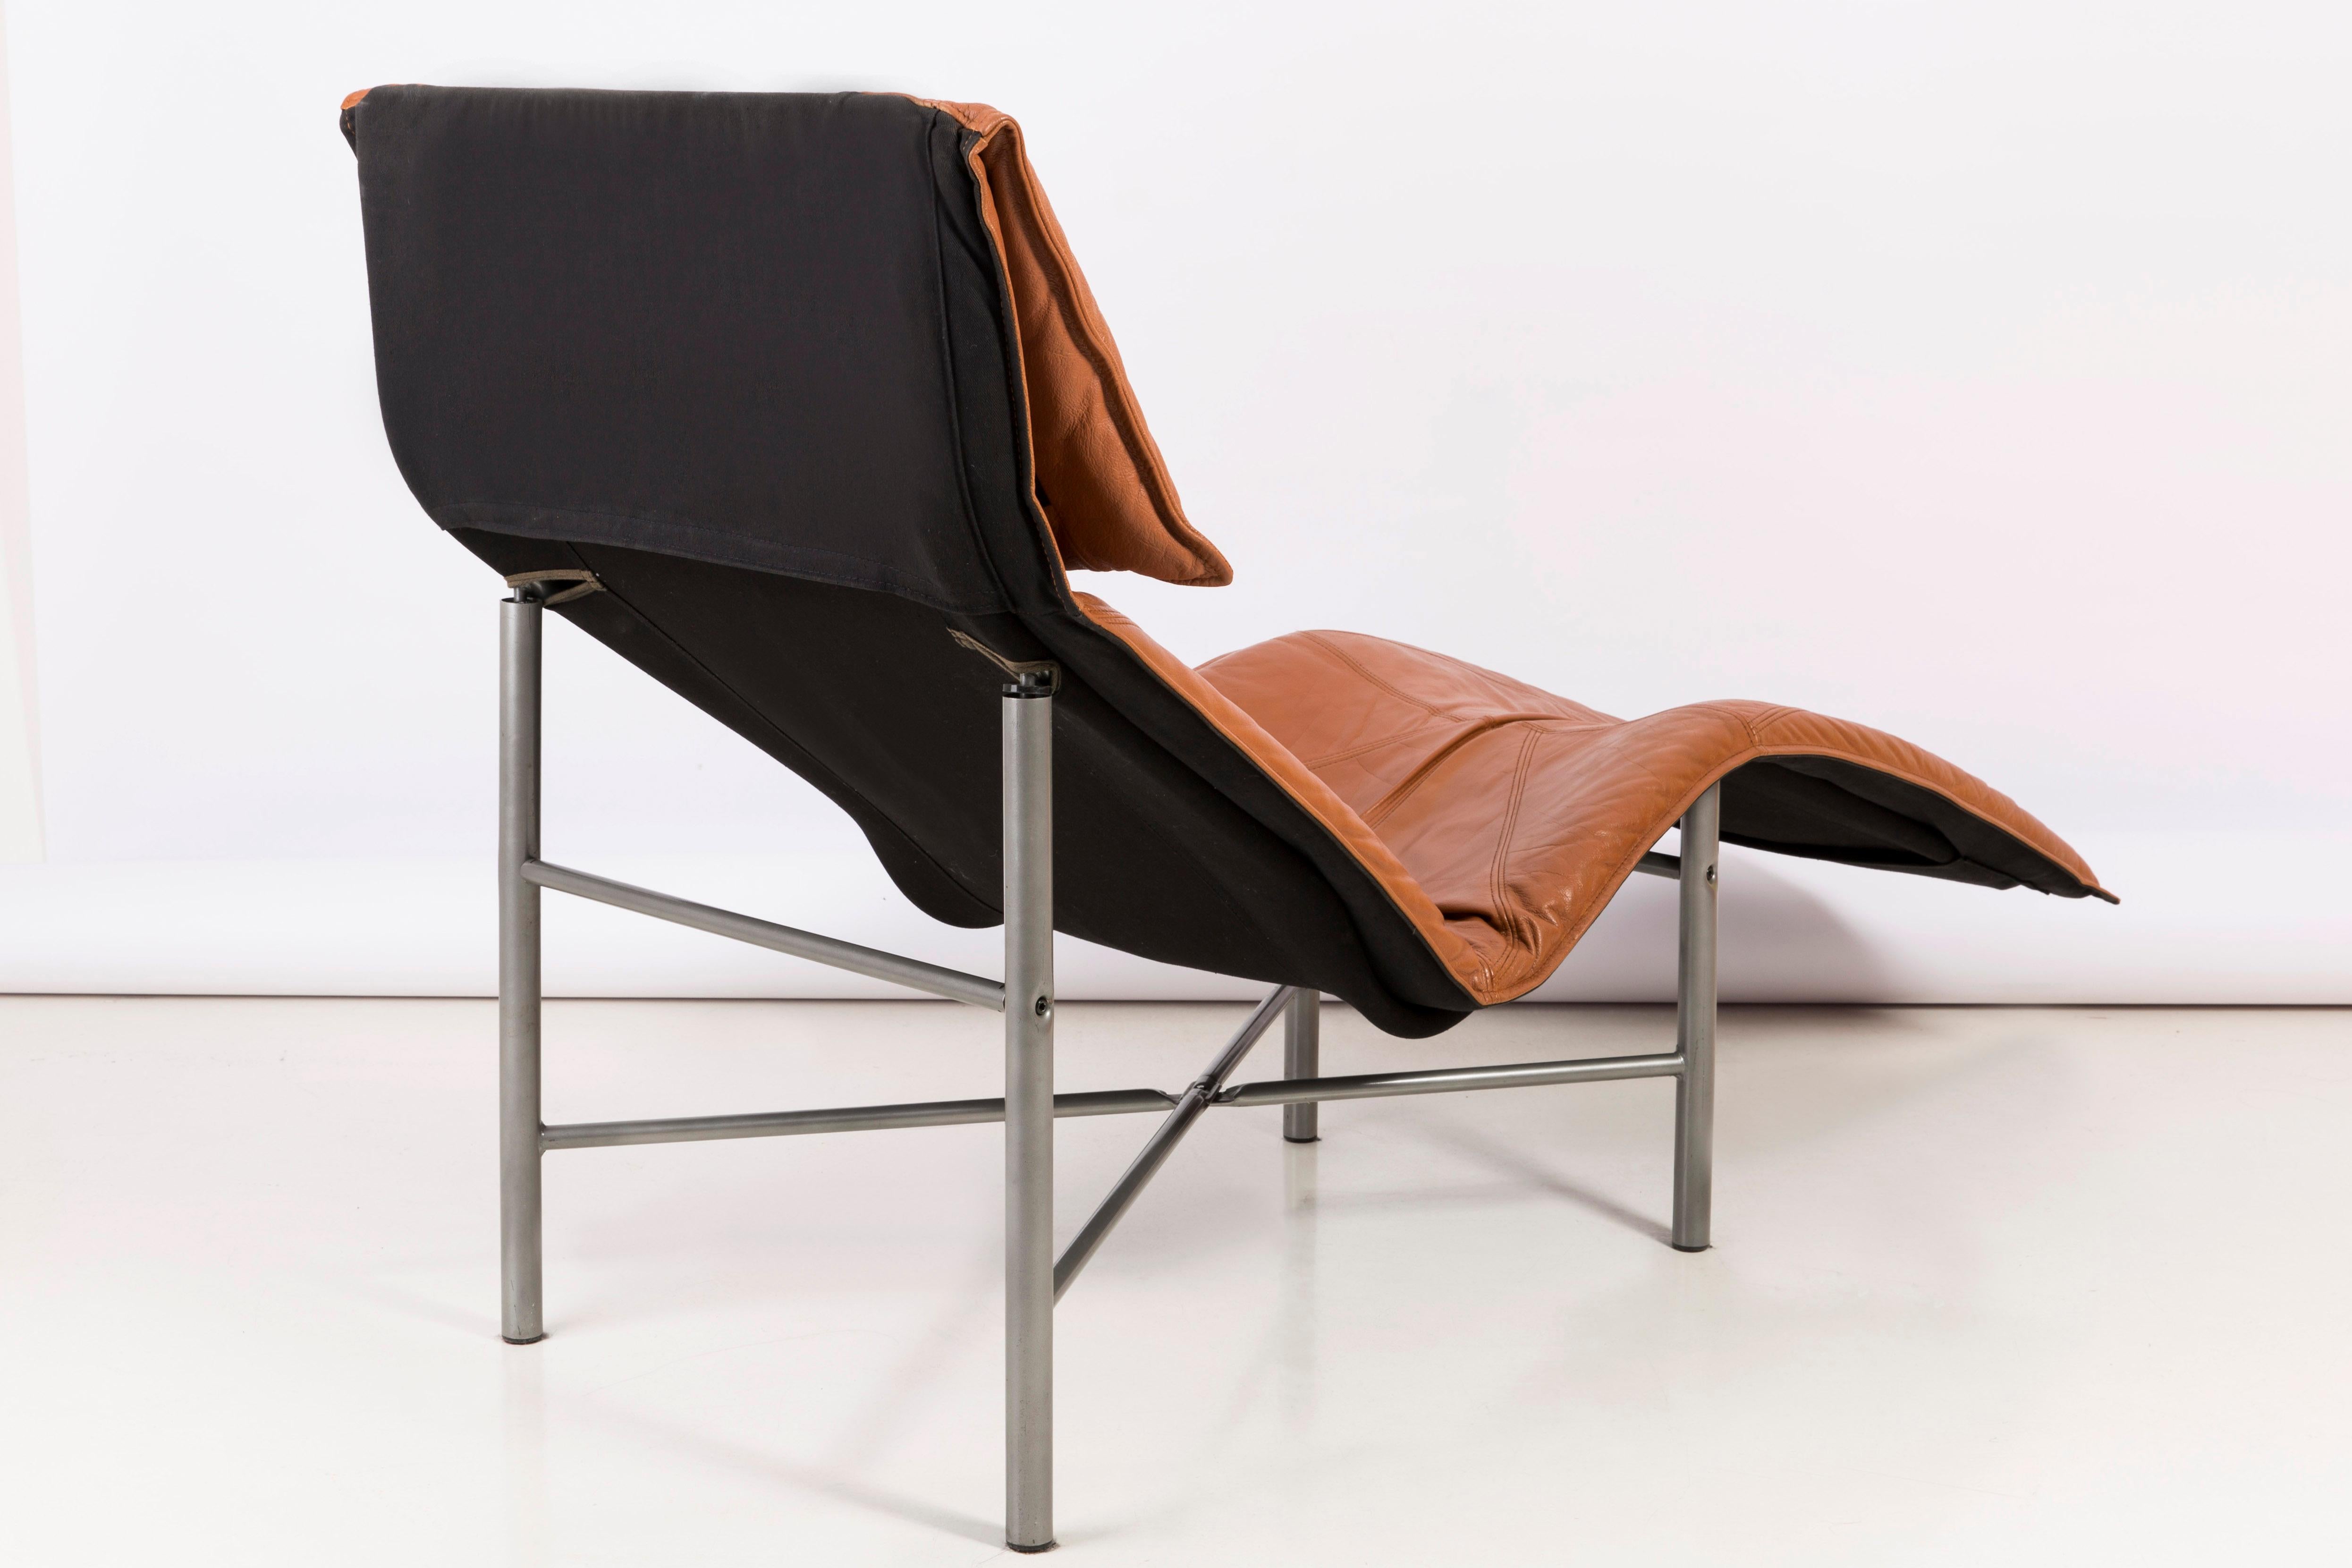 Two Midcentury Danish Modern Leather Chaise Lounge Chairs, Tord Björklund, 1980 For Sale 1